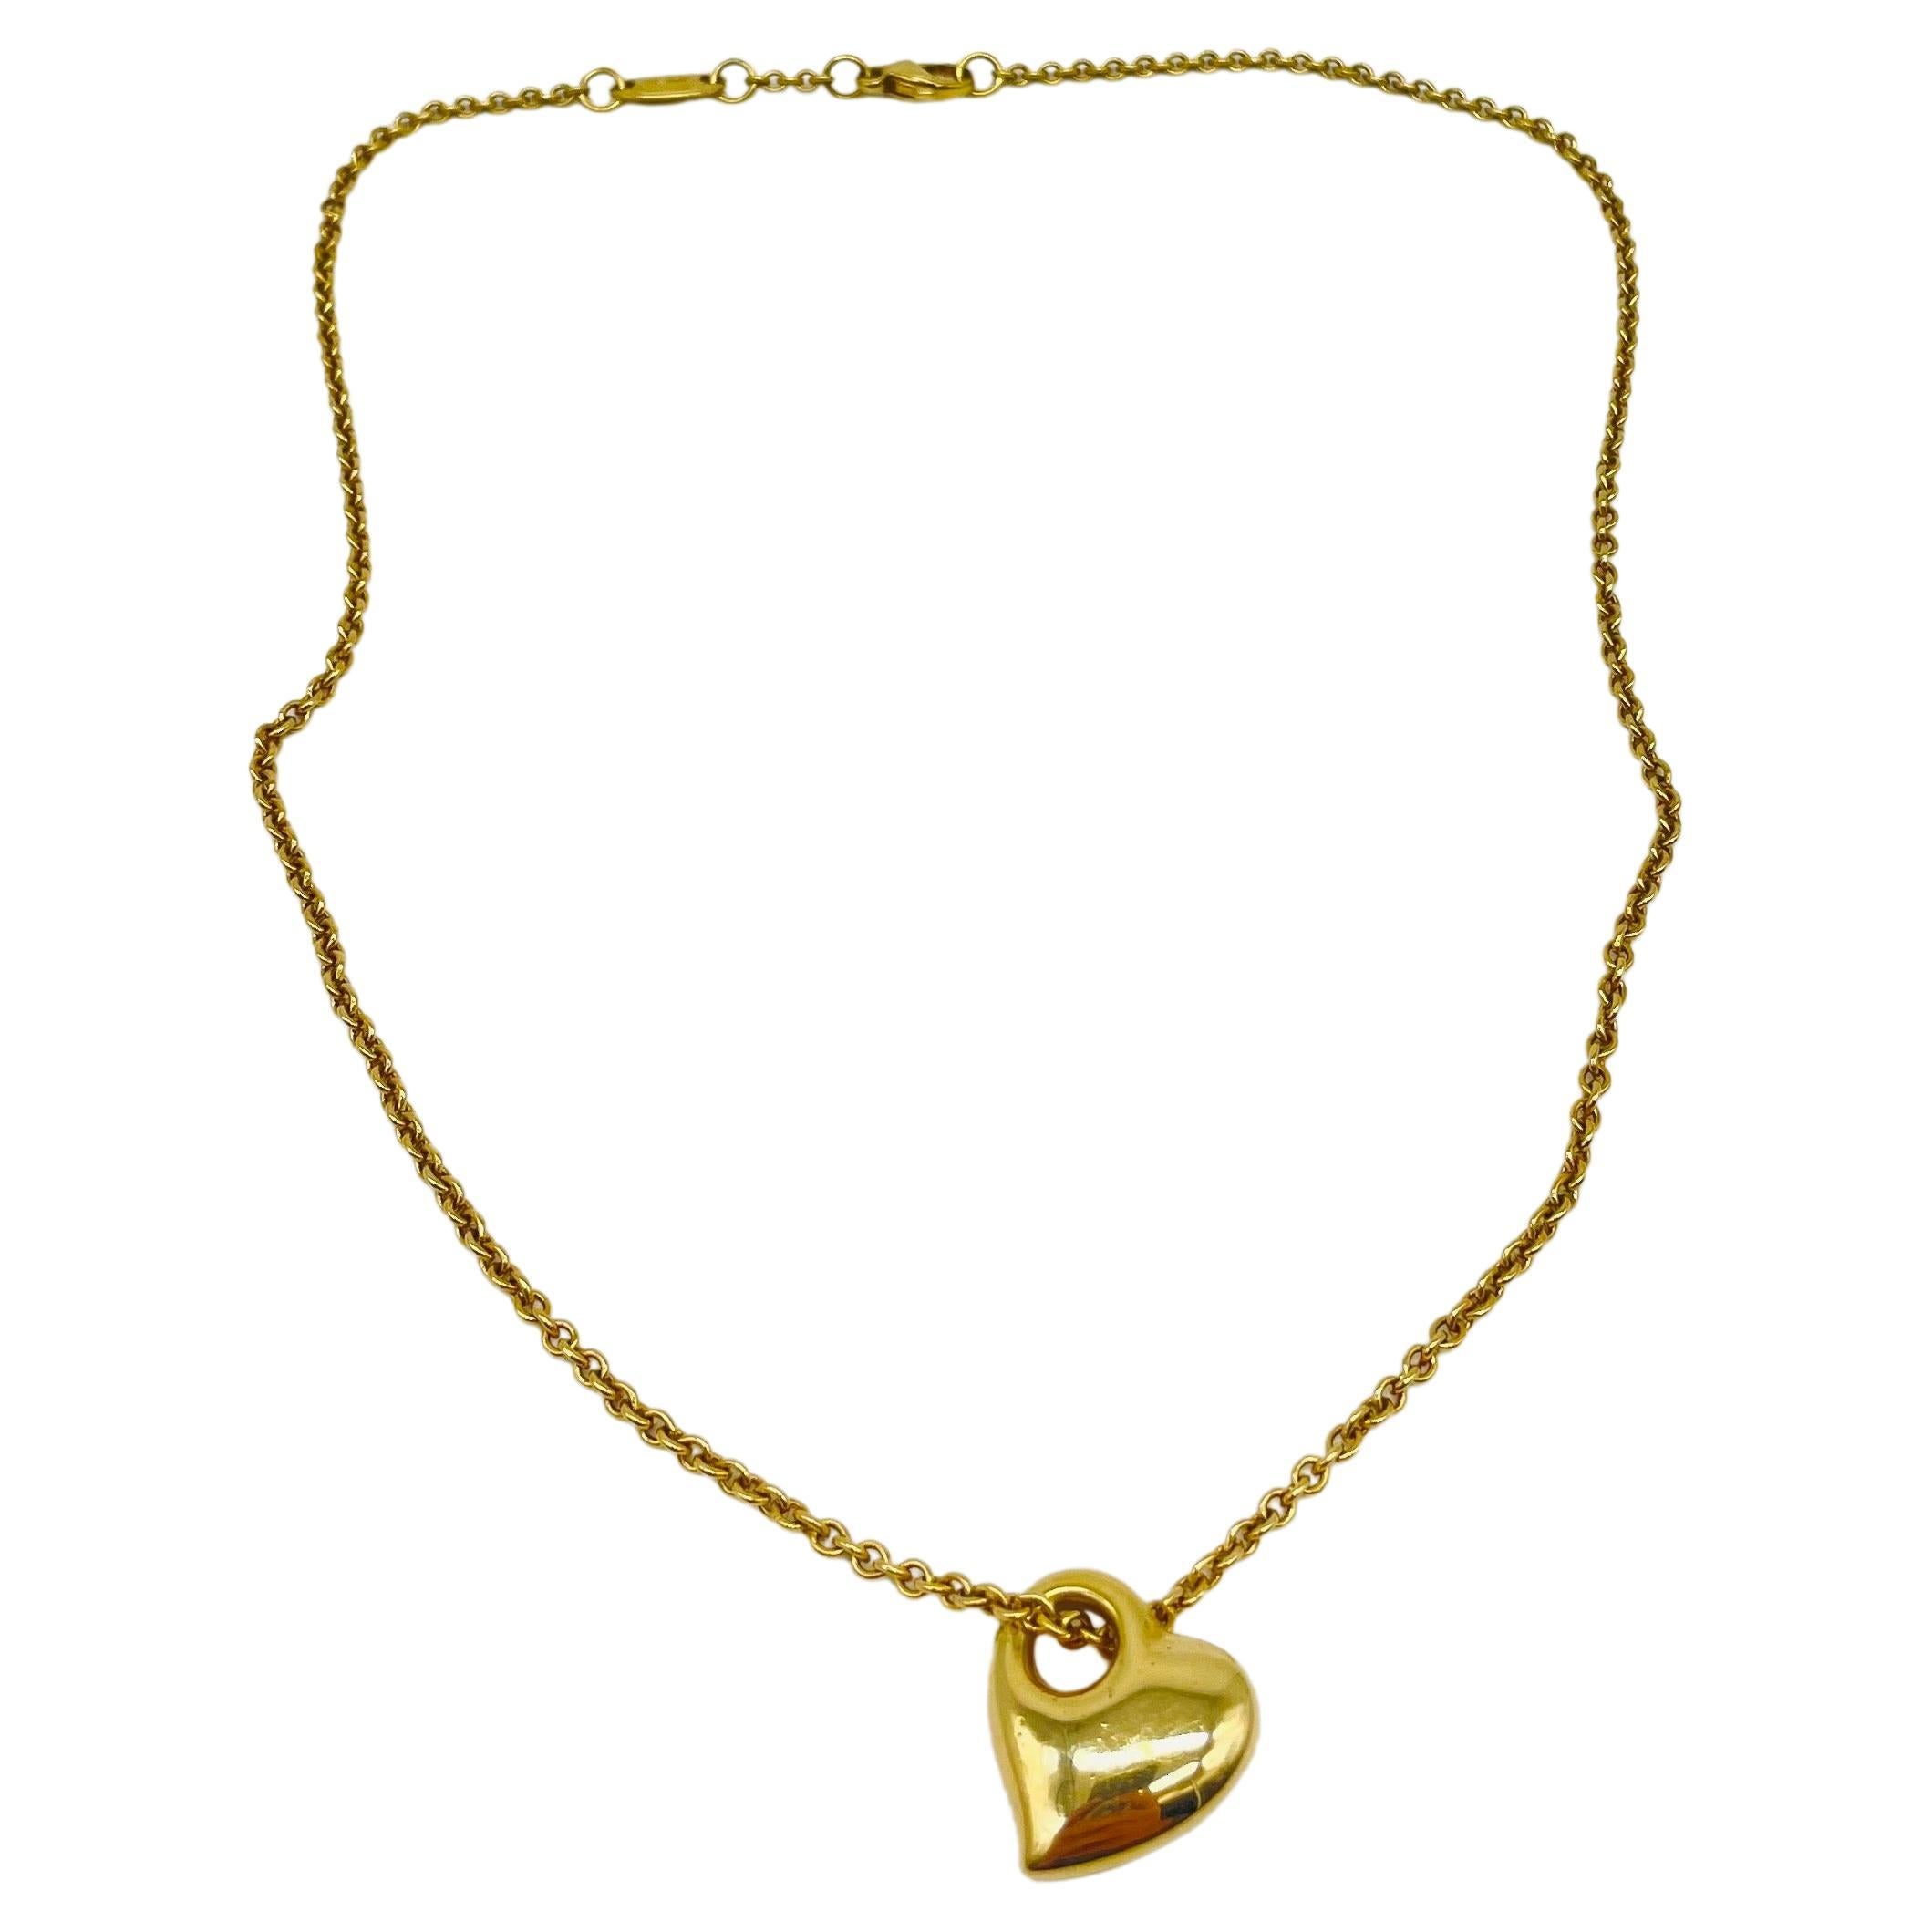 Immerse yourself in the dreamlike beauty of this exquisite gold necklace, adorned with a stunning heart-shaped pendant. Crafted in 14k yellow gold, this beautiful necklace exudes a radiant glow, capturing and reflecting light in a mesmerizing